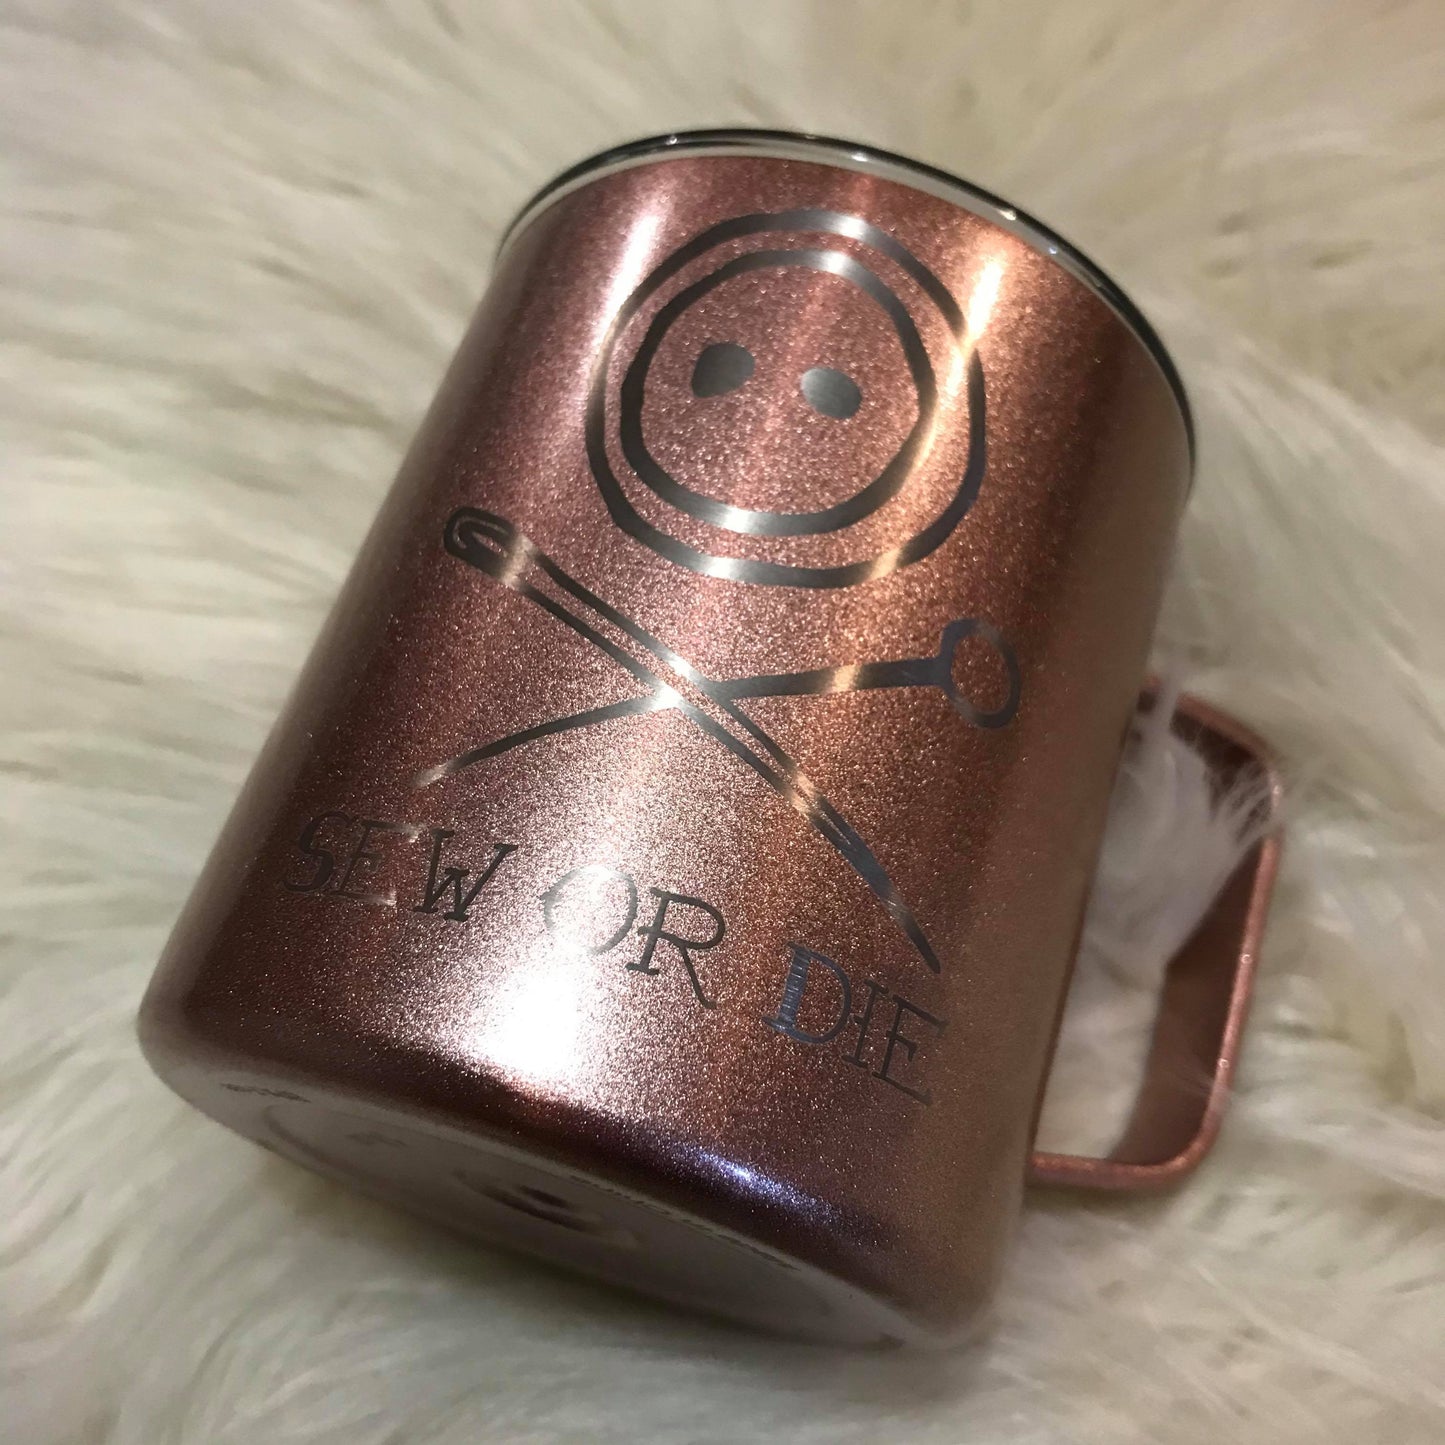 NEW styles Engraved Stainless Steel Mug with lid - 14 ounces RETAIL - 6 to choose from.